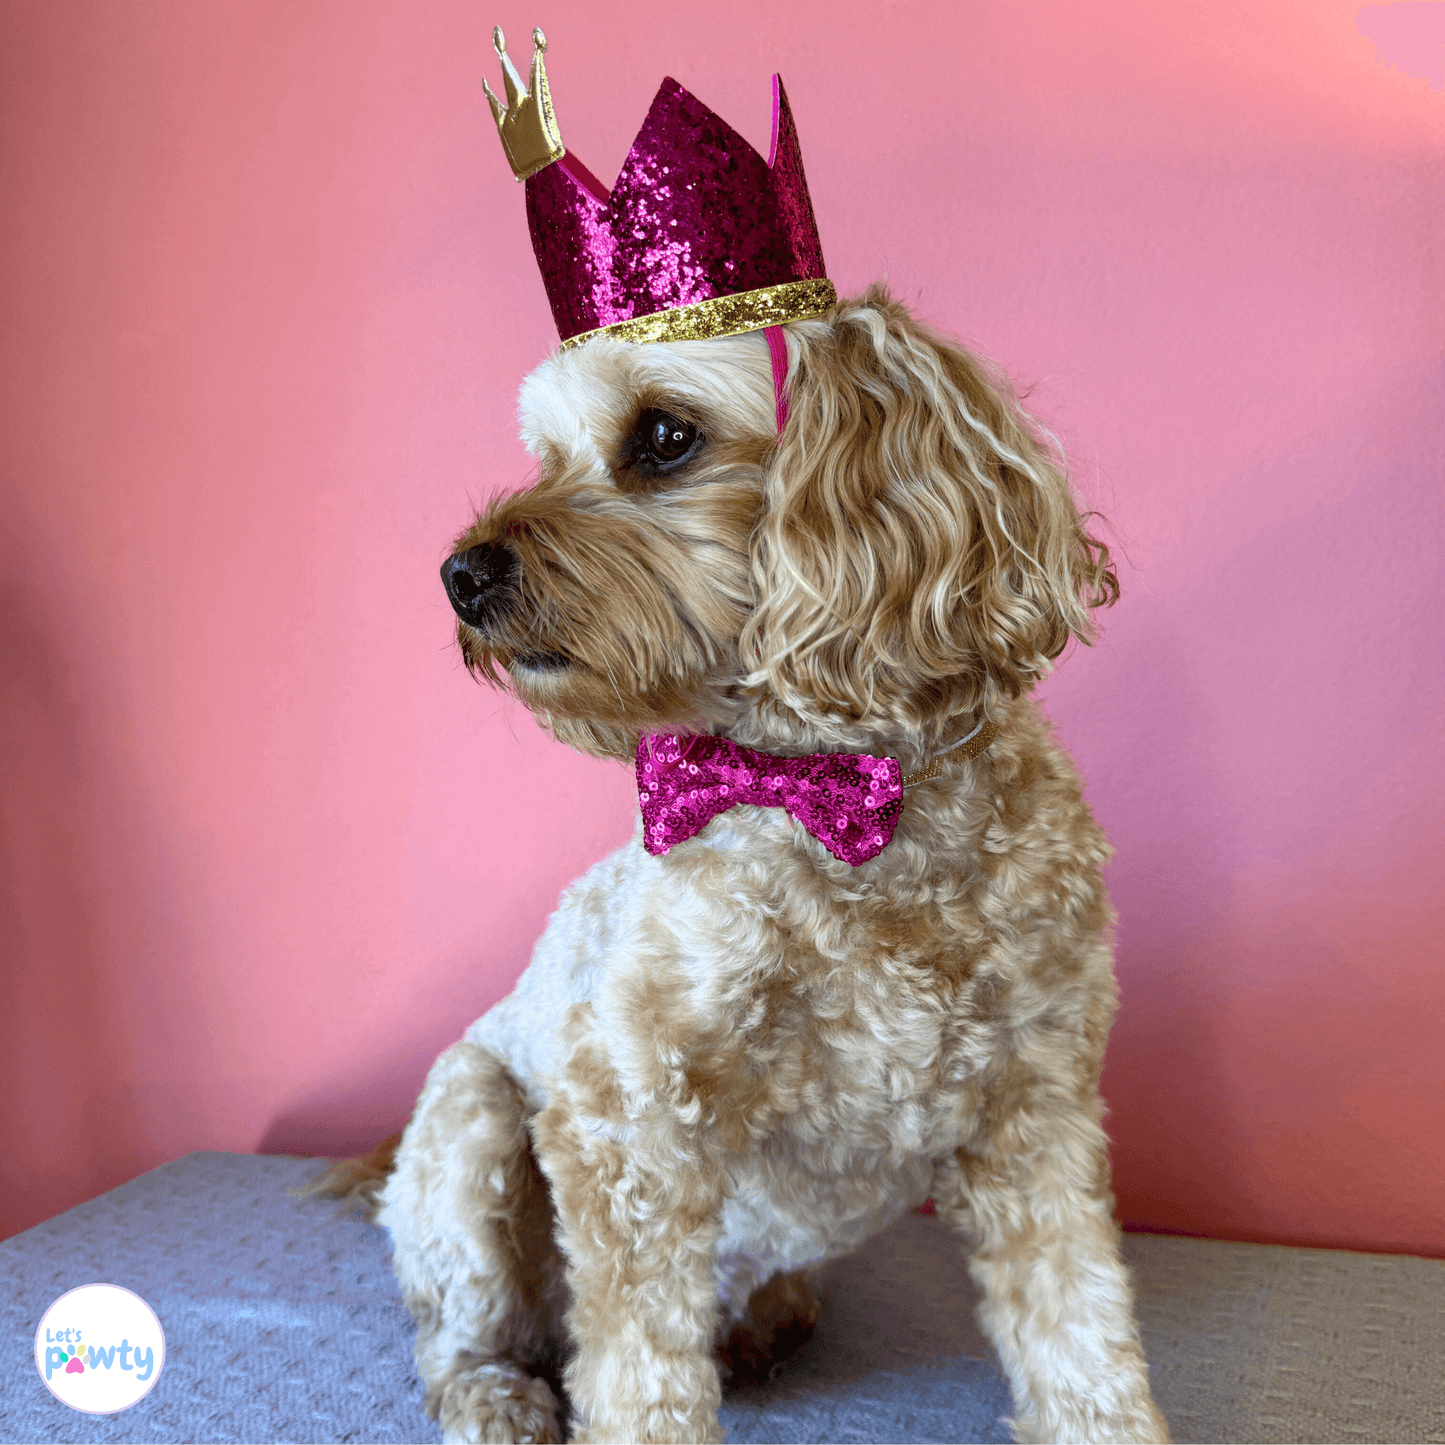 og birthday hat, crown, bow tie set, let's pawty